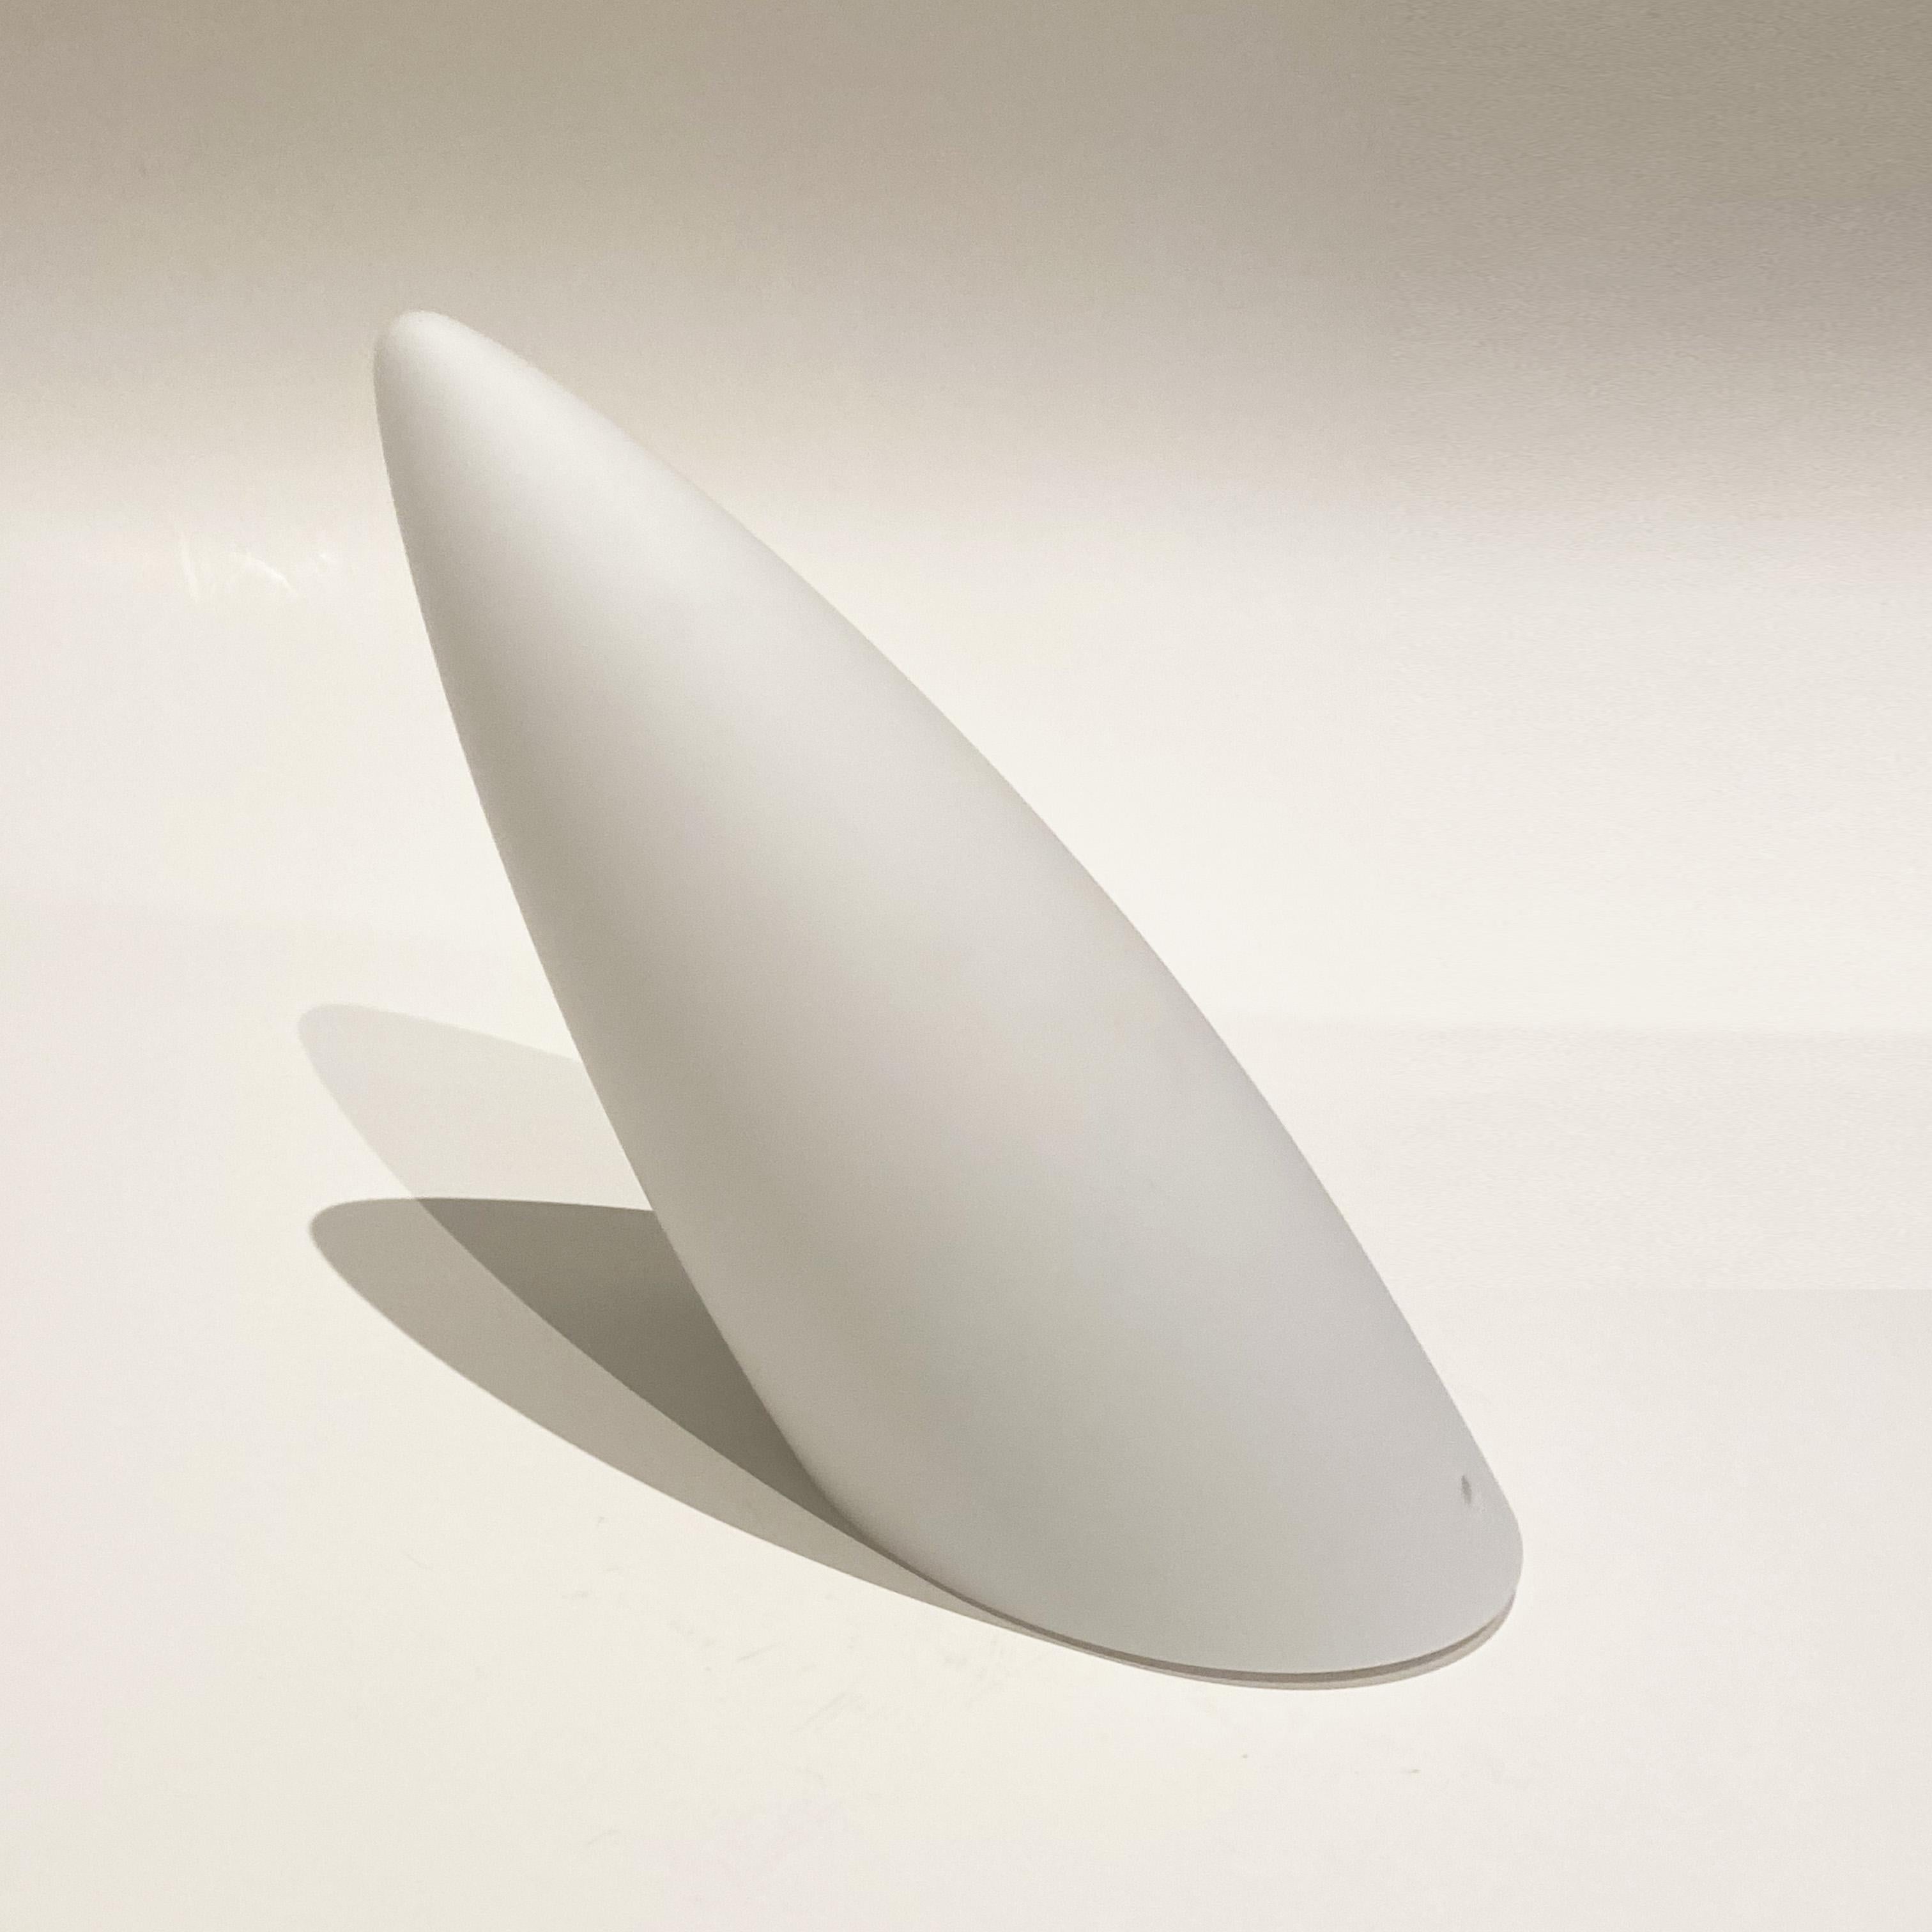 Post-Modern Postmodern Philippe Starck Luci Fair Sconce for Flos, 1st edition, 1980s. For Sale